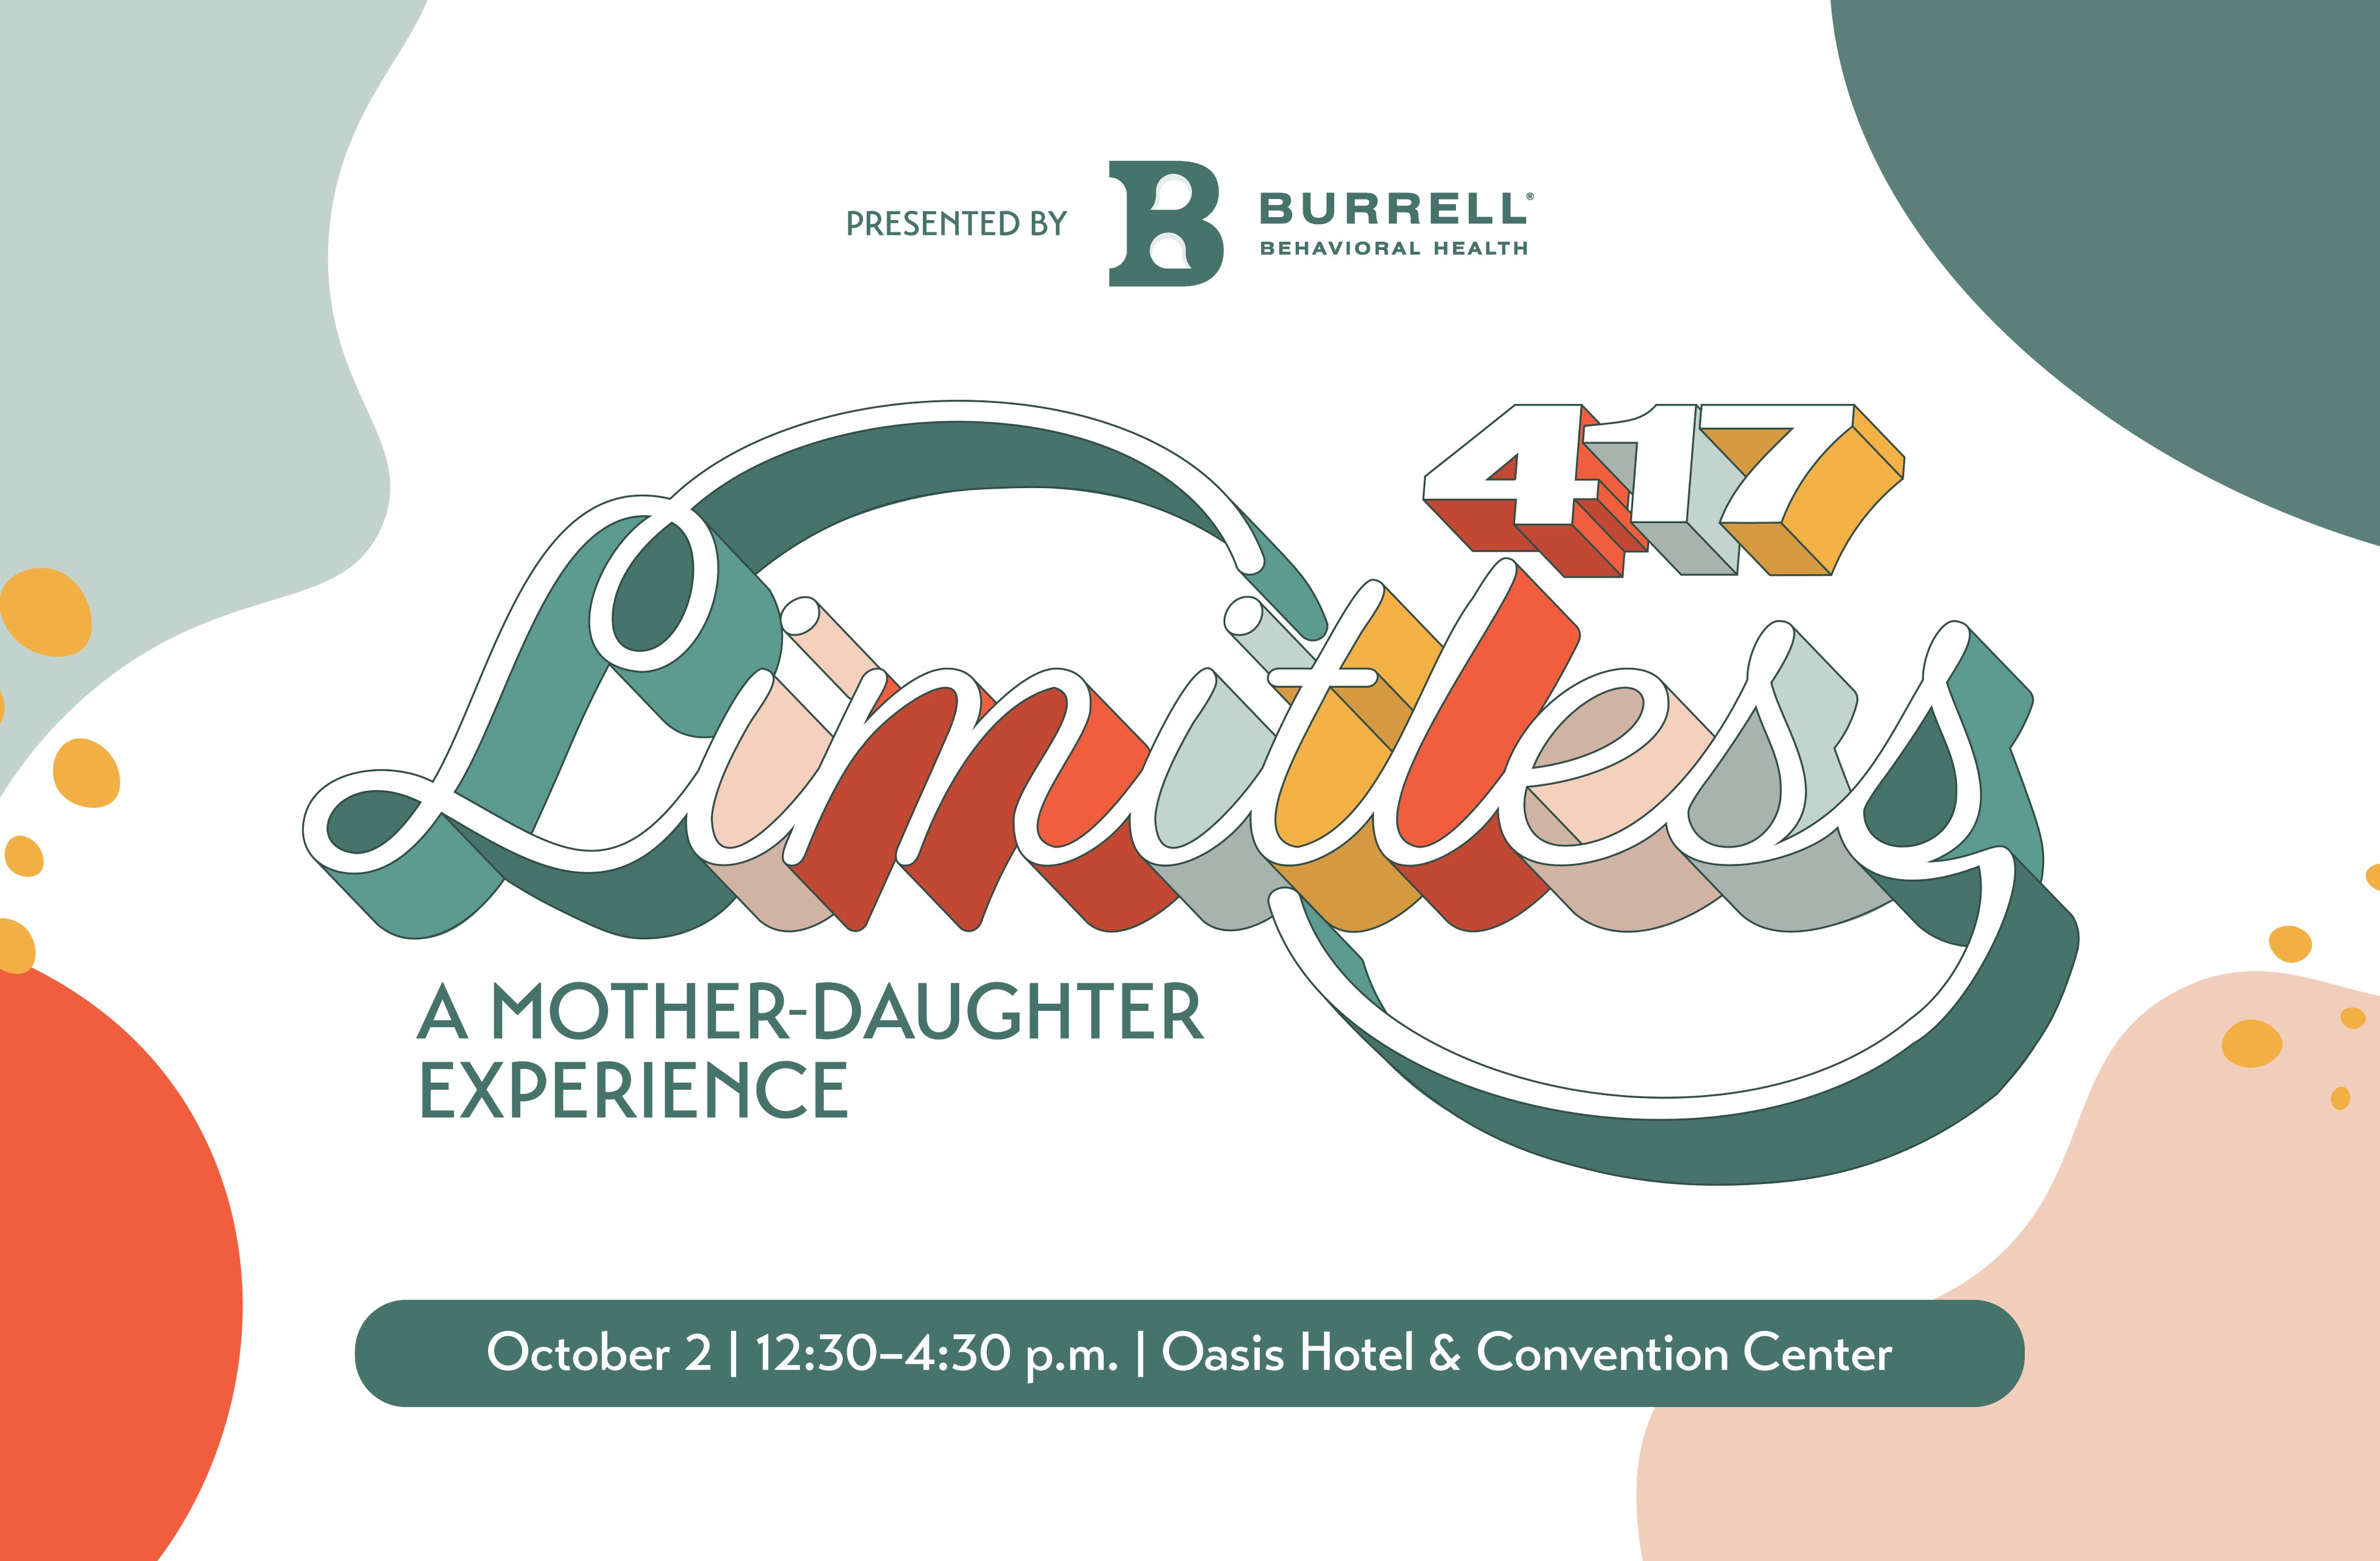 Limitless: A Mother-Daughter Experience